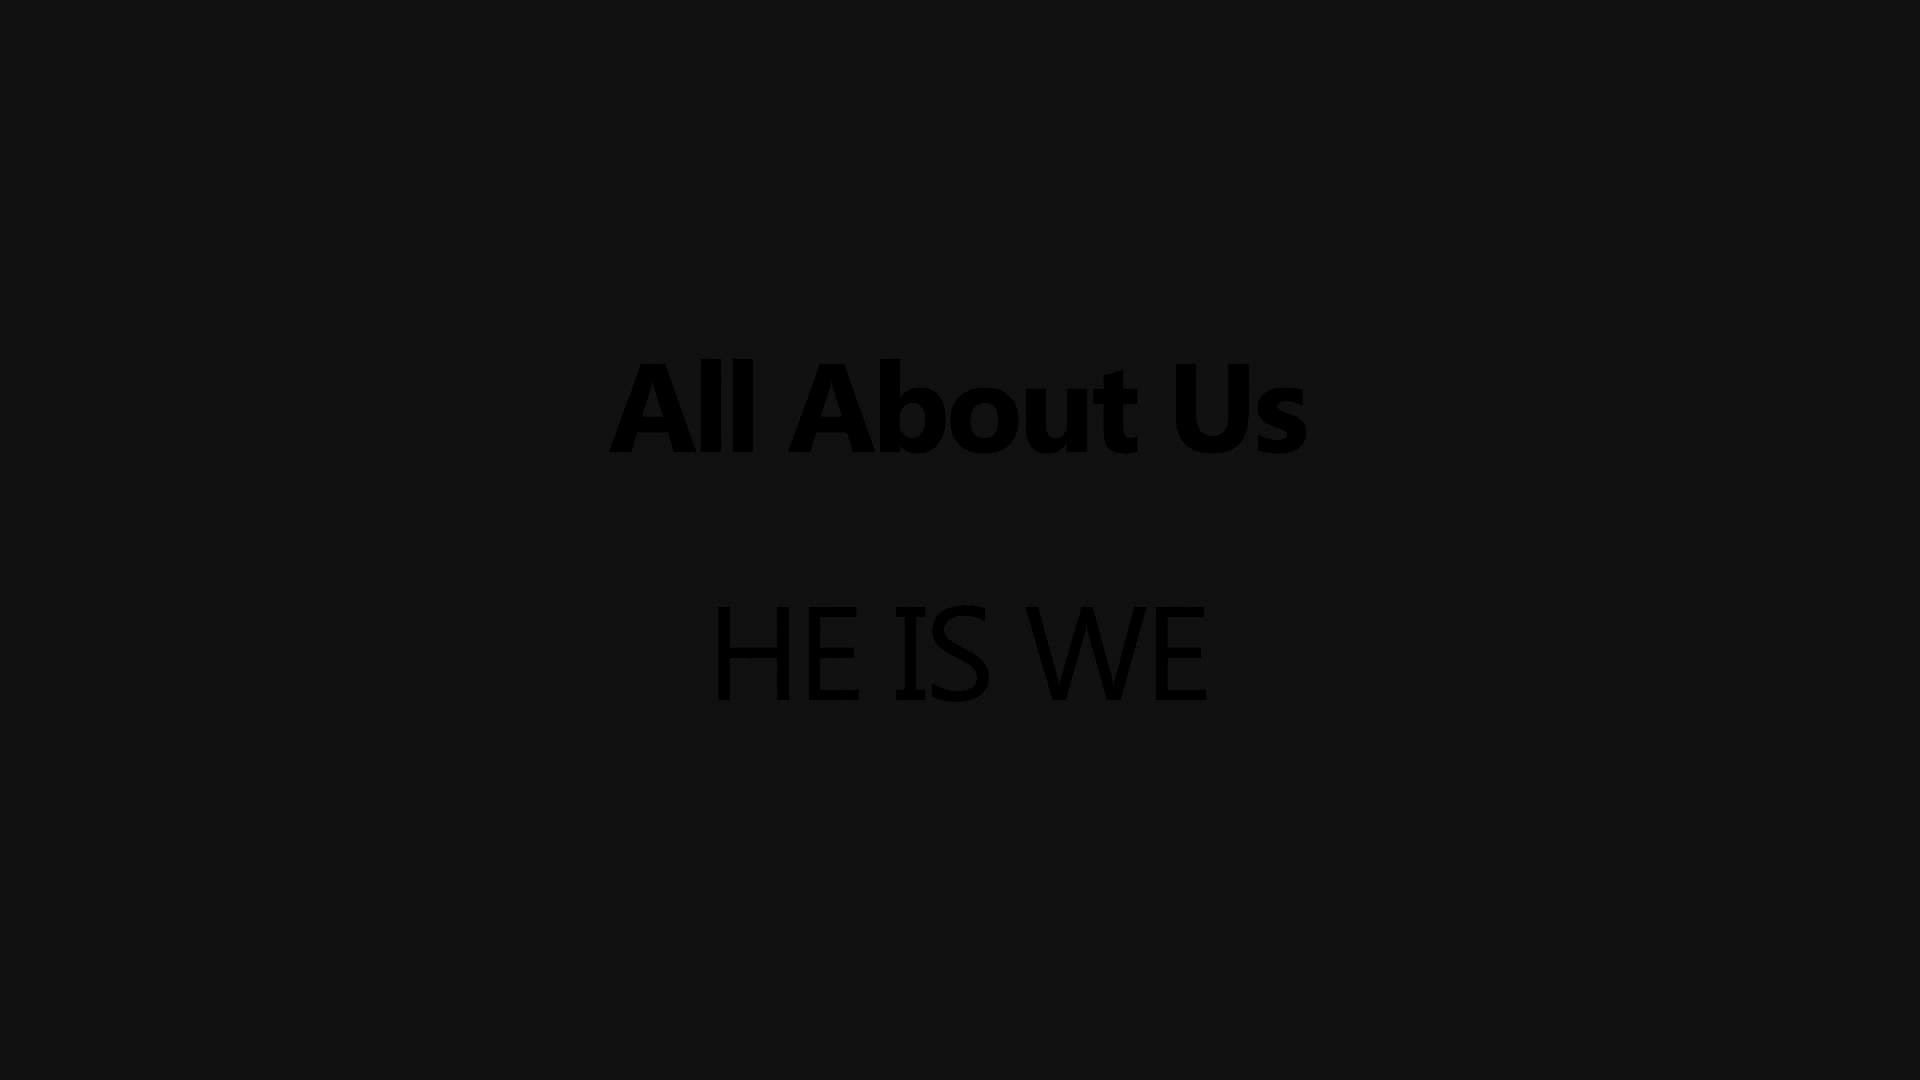 1920x1080 All About Us He is We feat Owl City lyrics